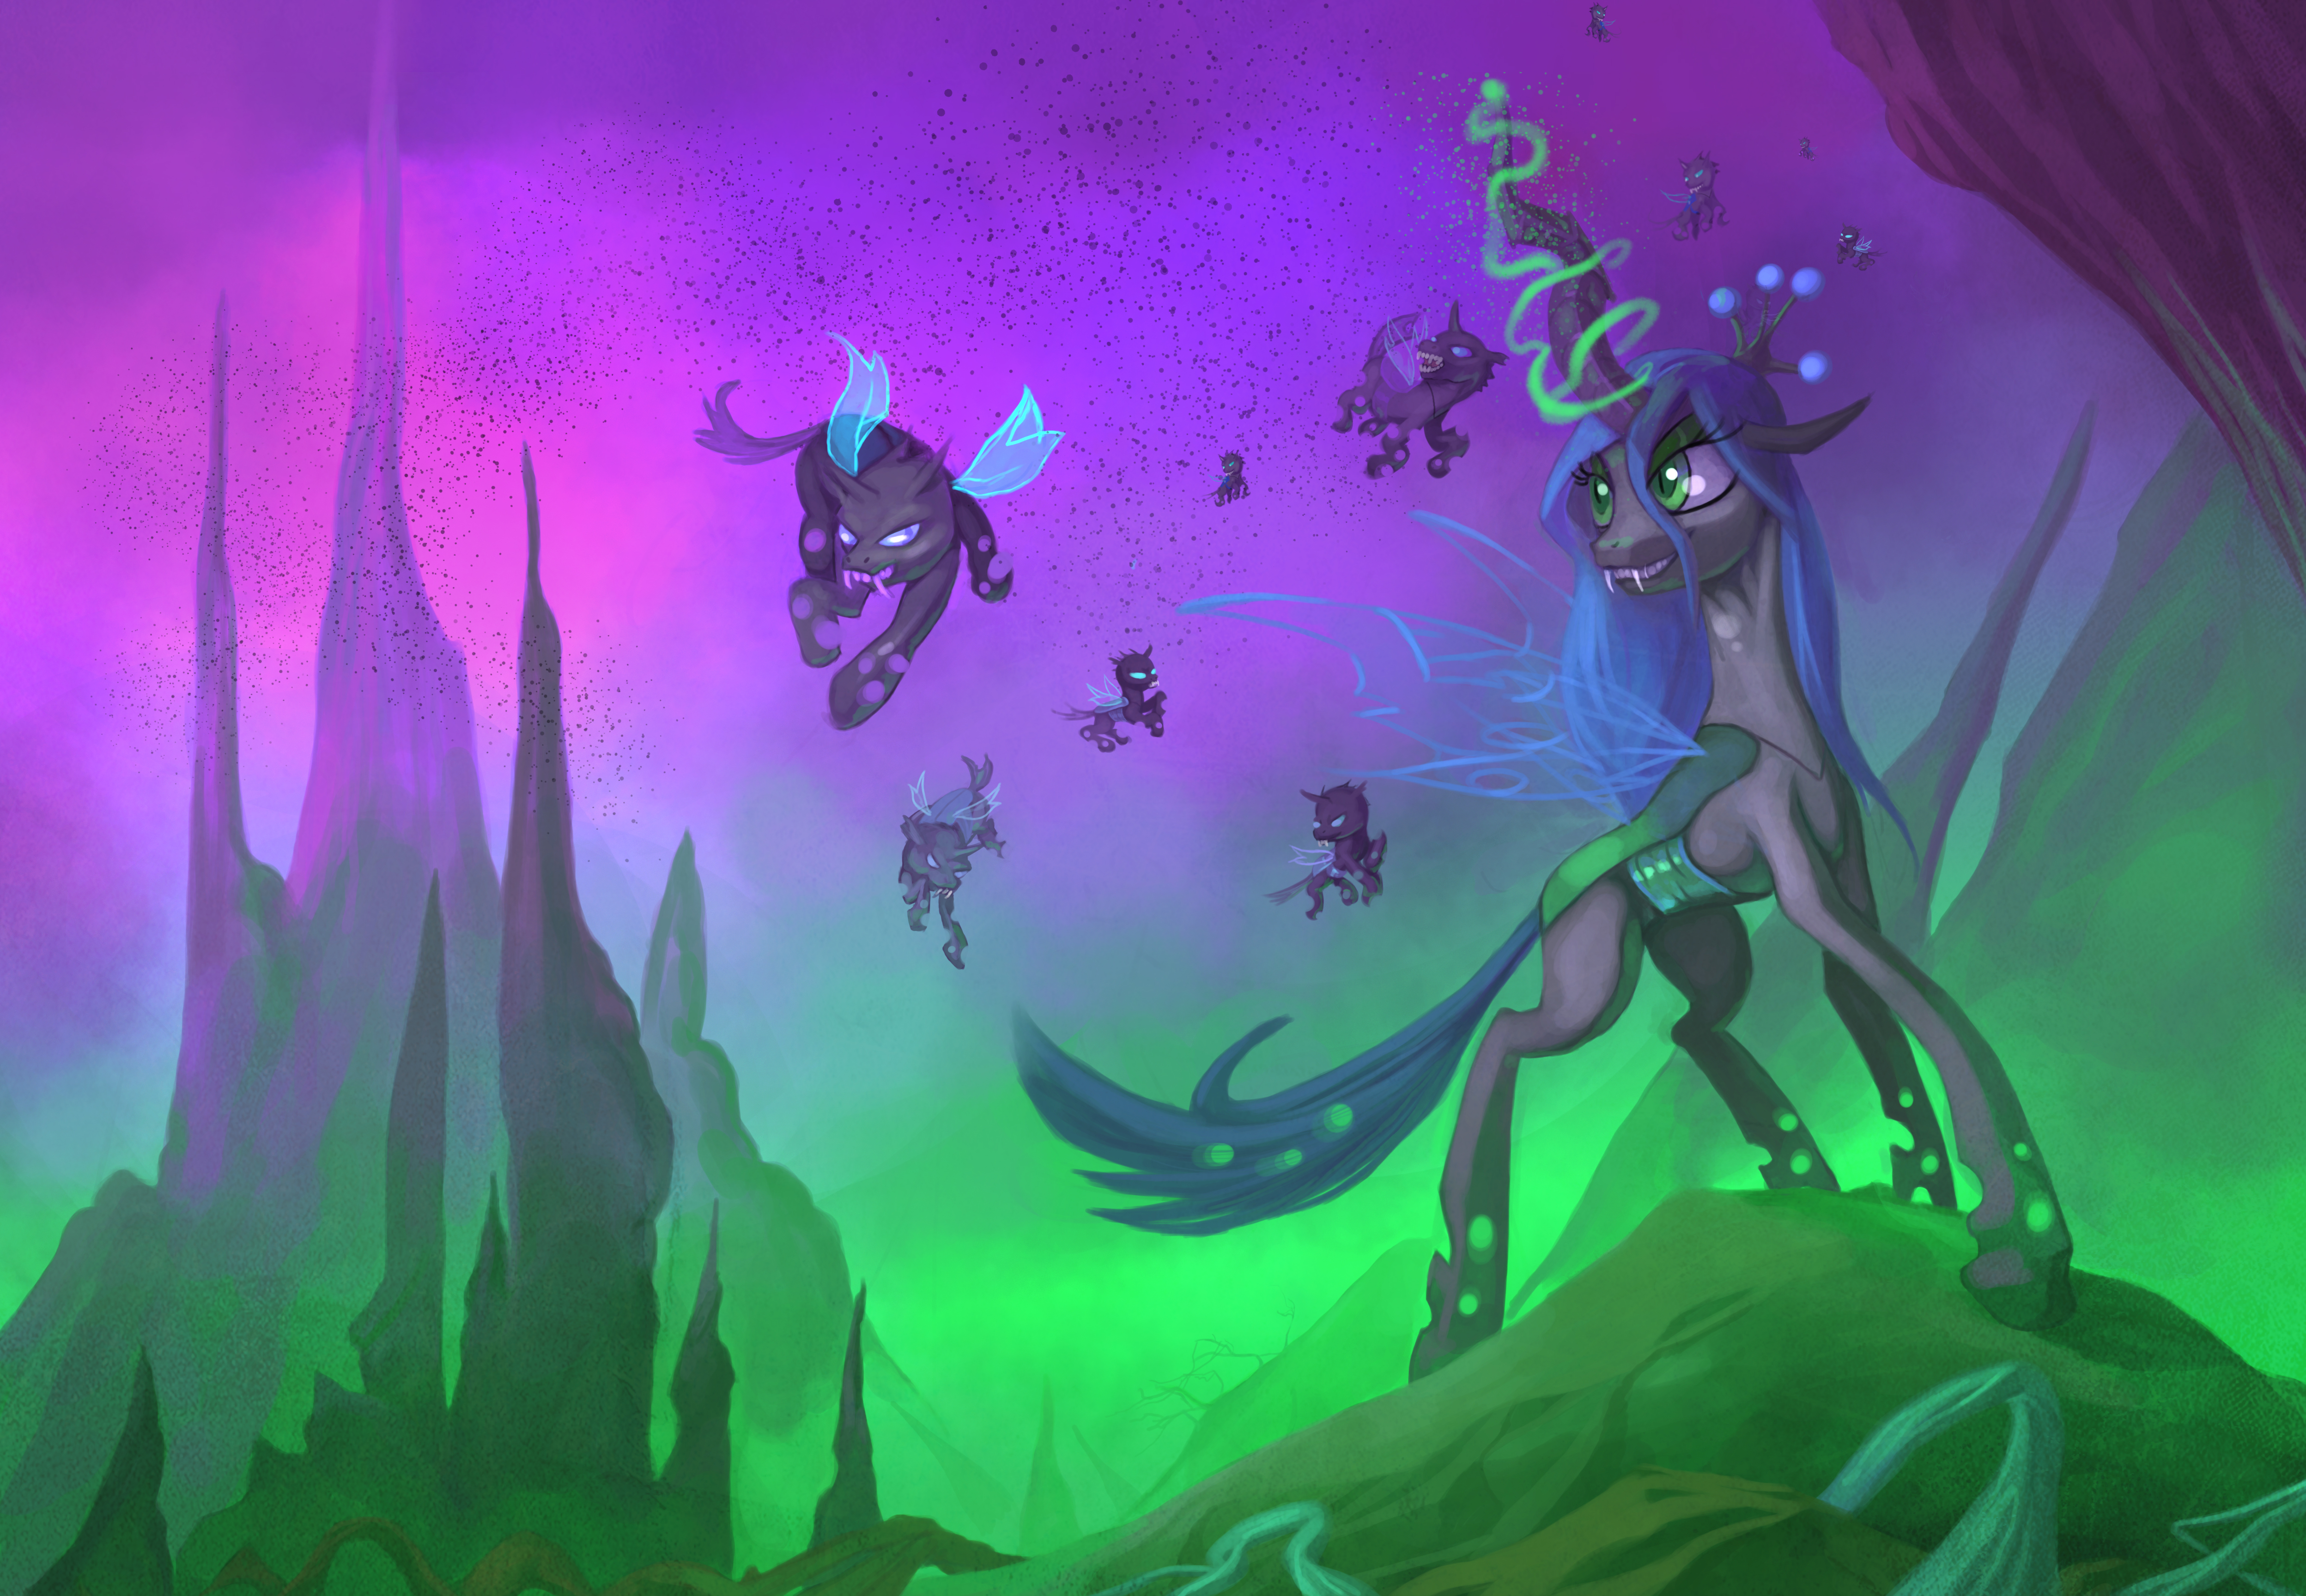 Queen of the changelings by envidia14